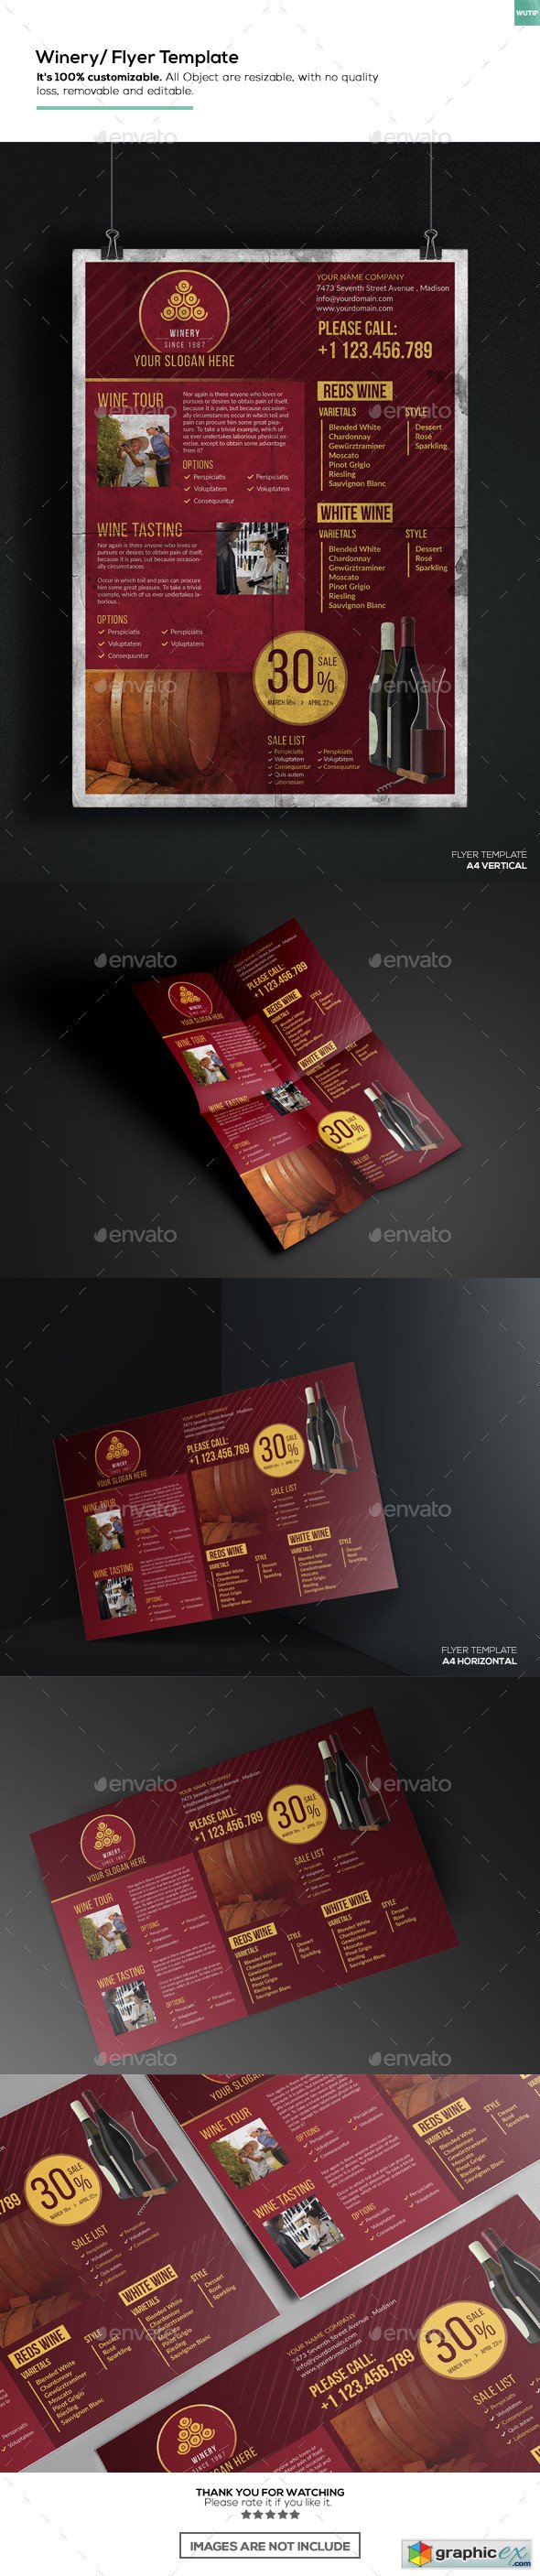 Winery - Flyer Template